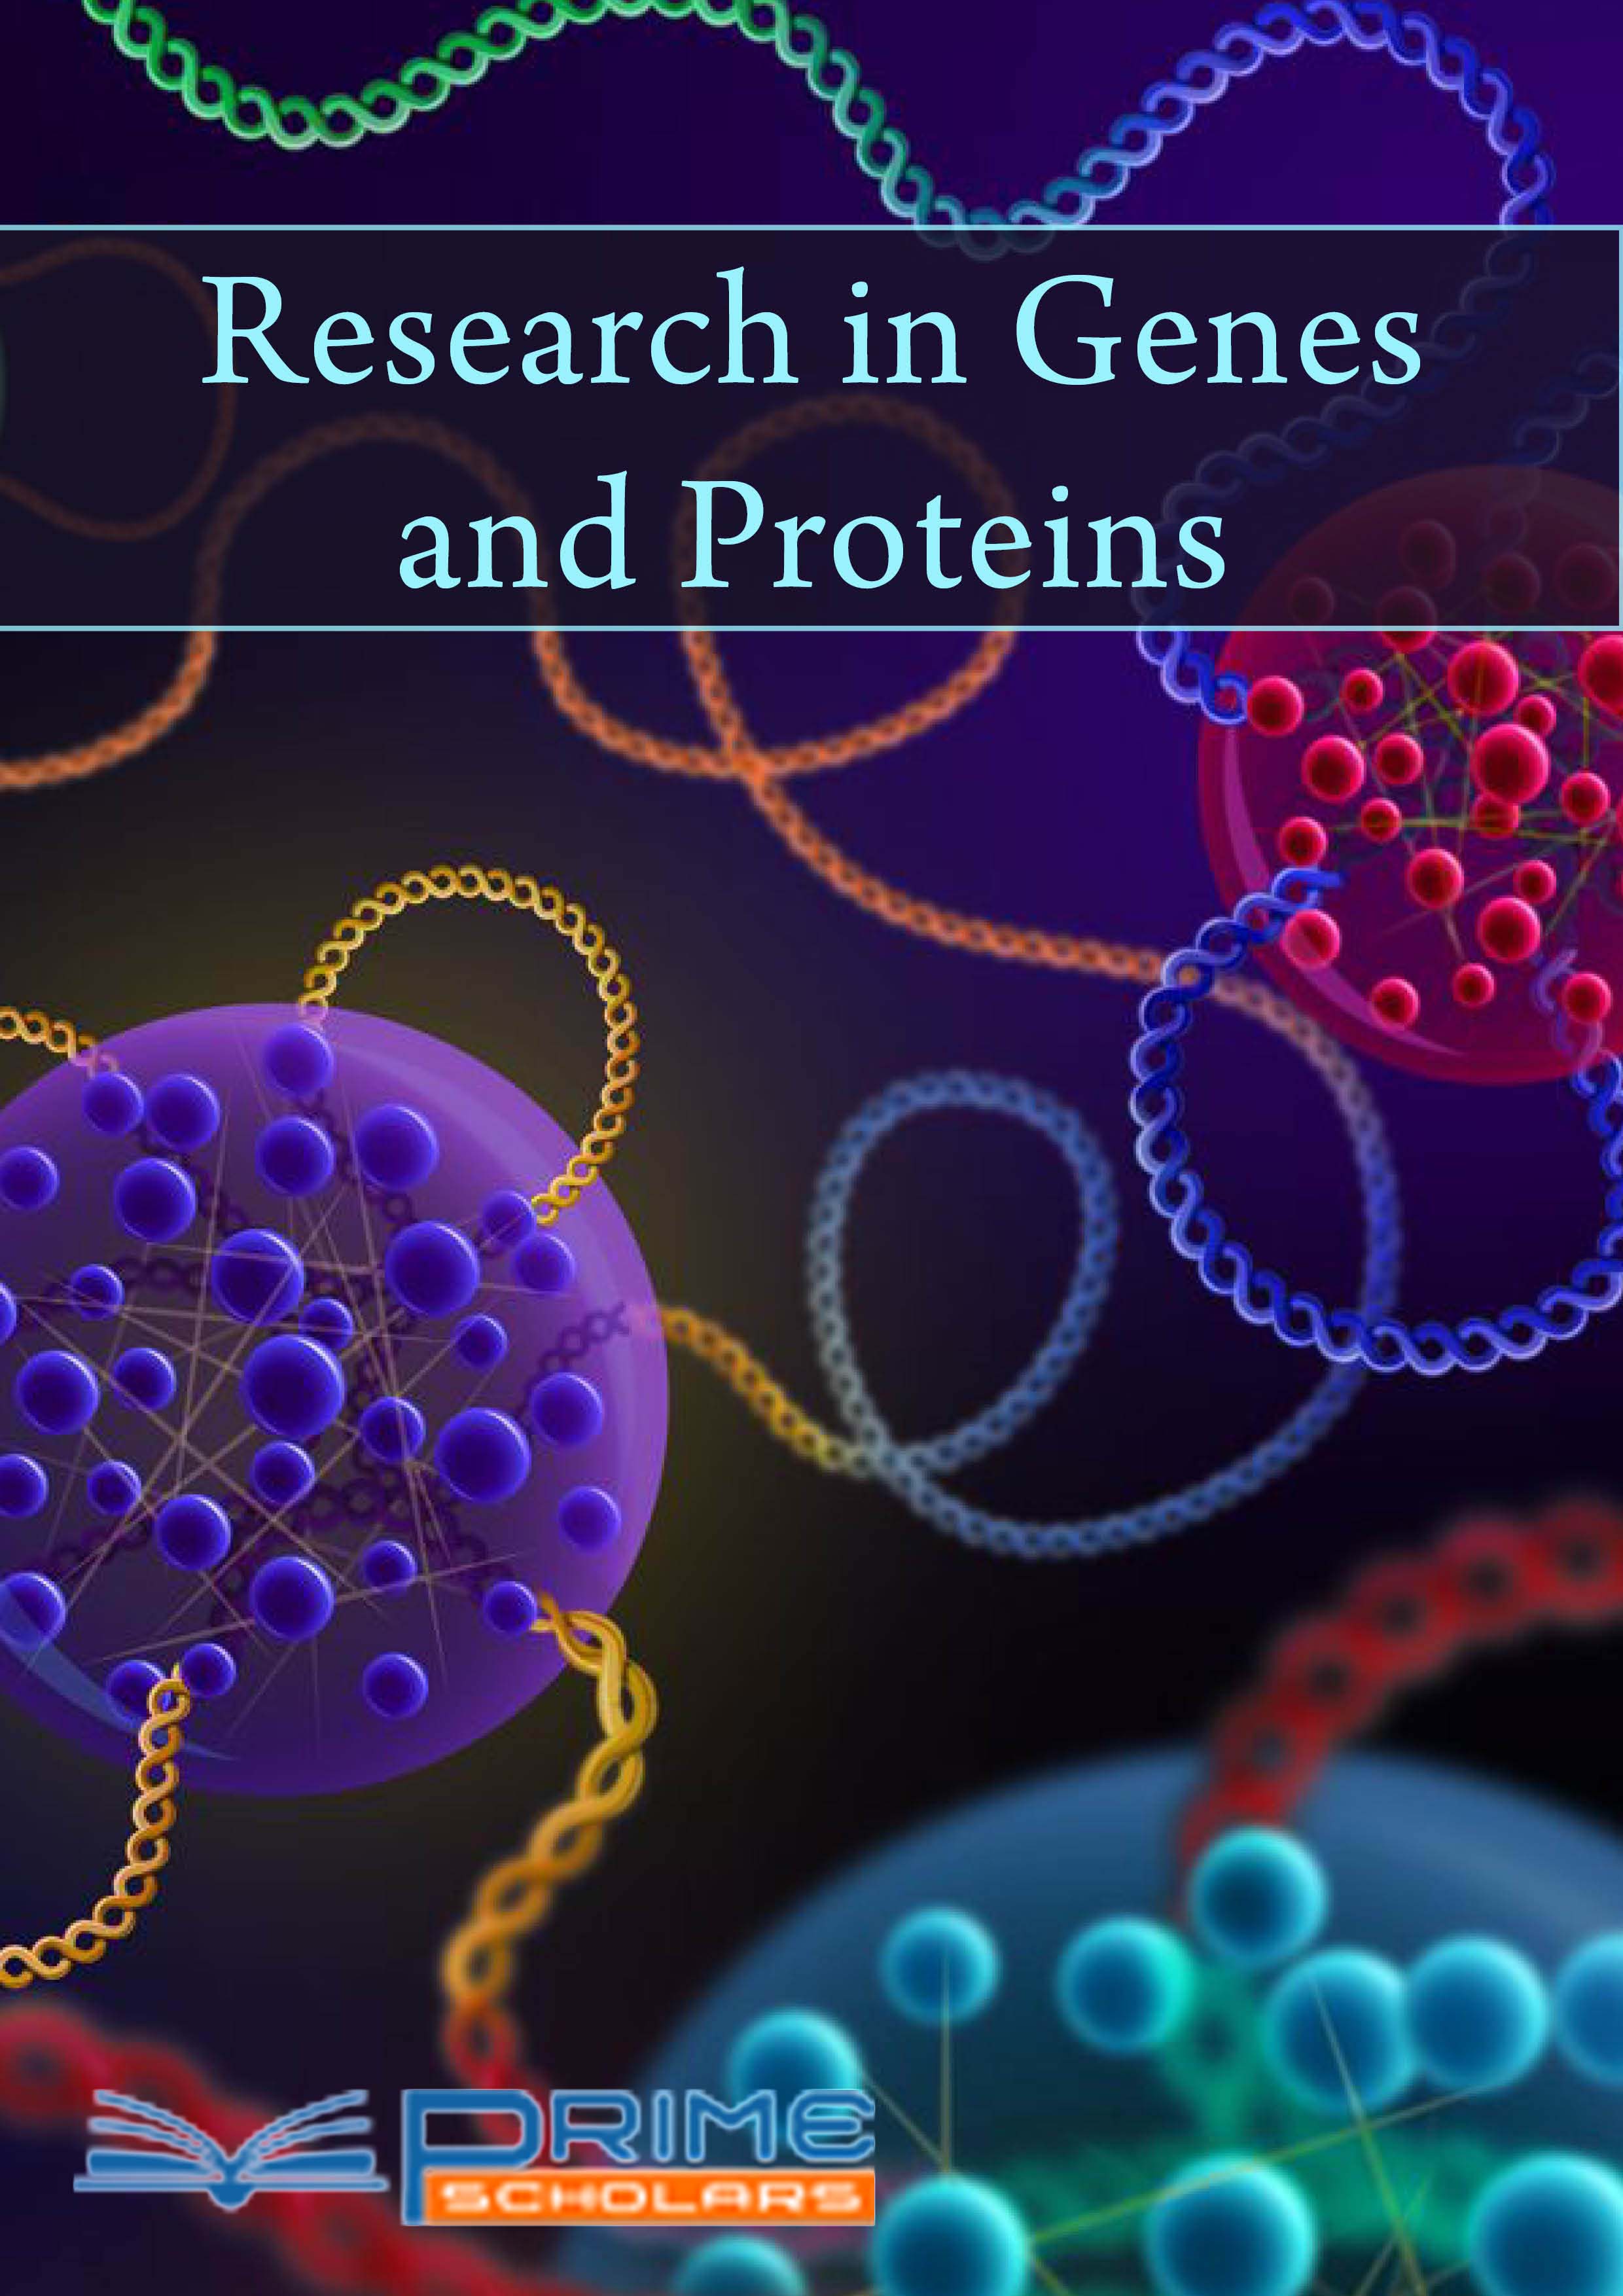 research-in-genes-and-proteins-flyer.jpg